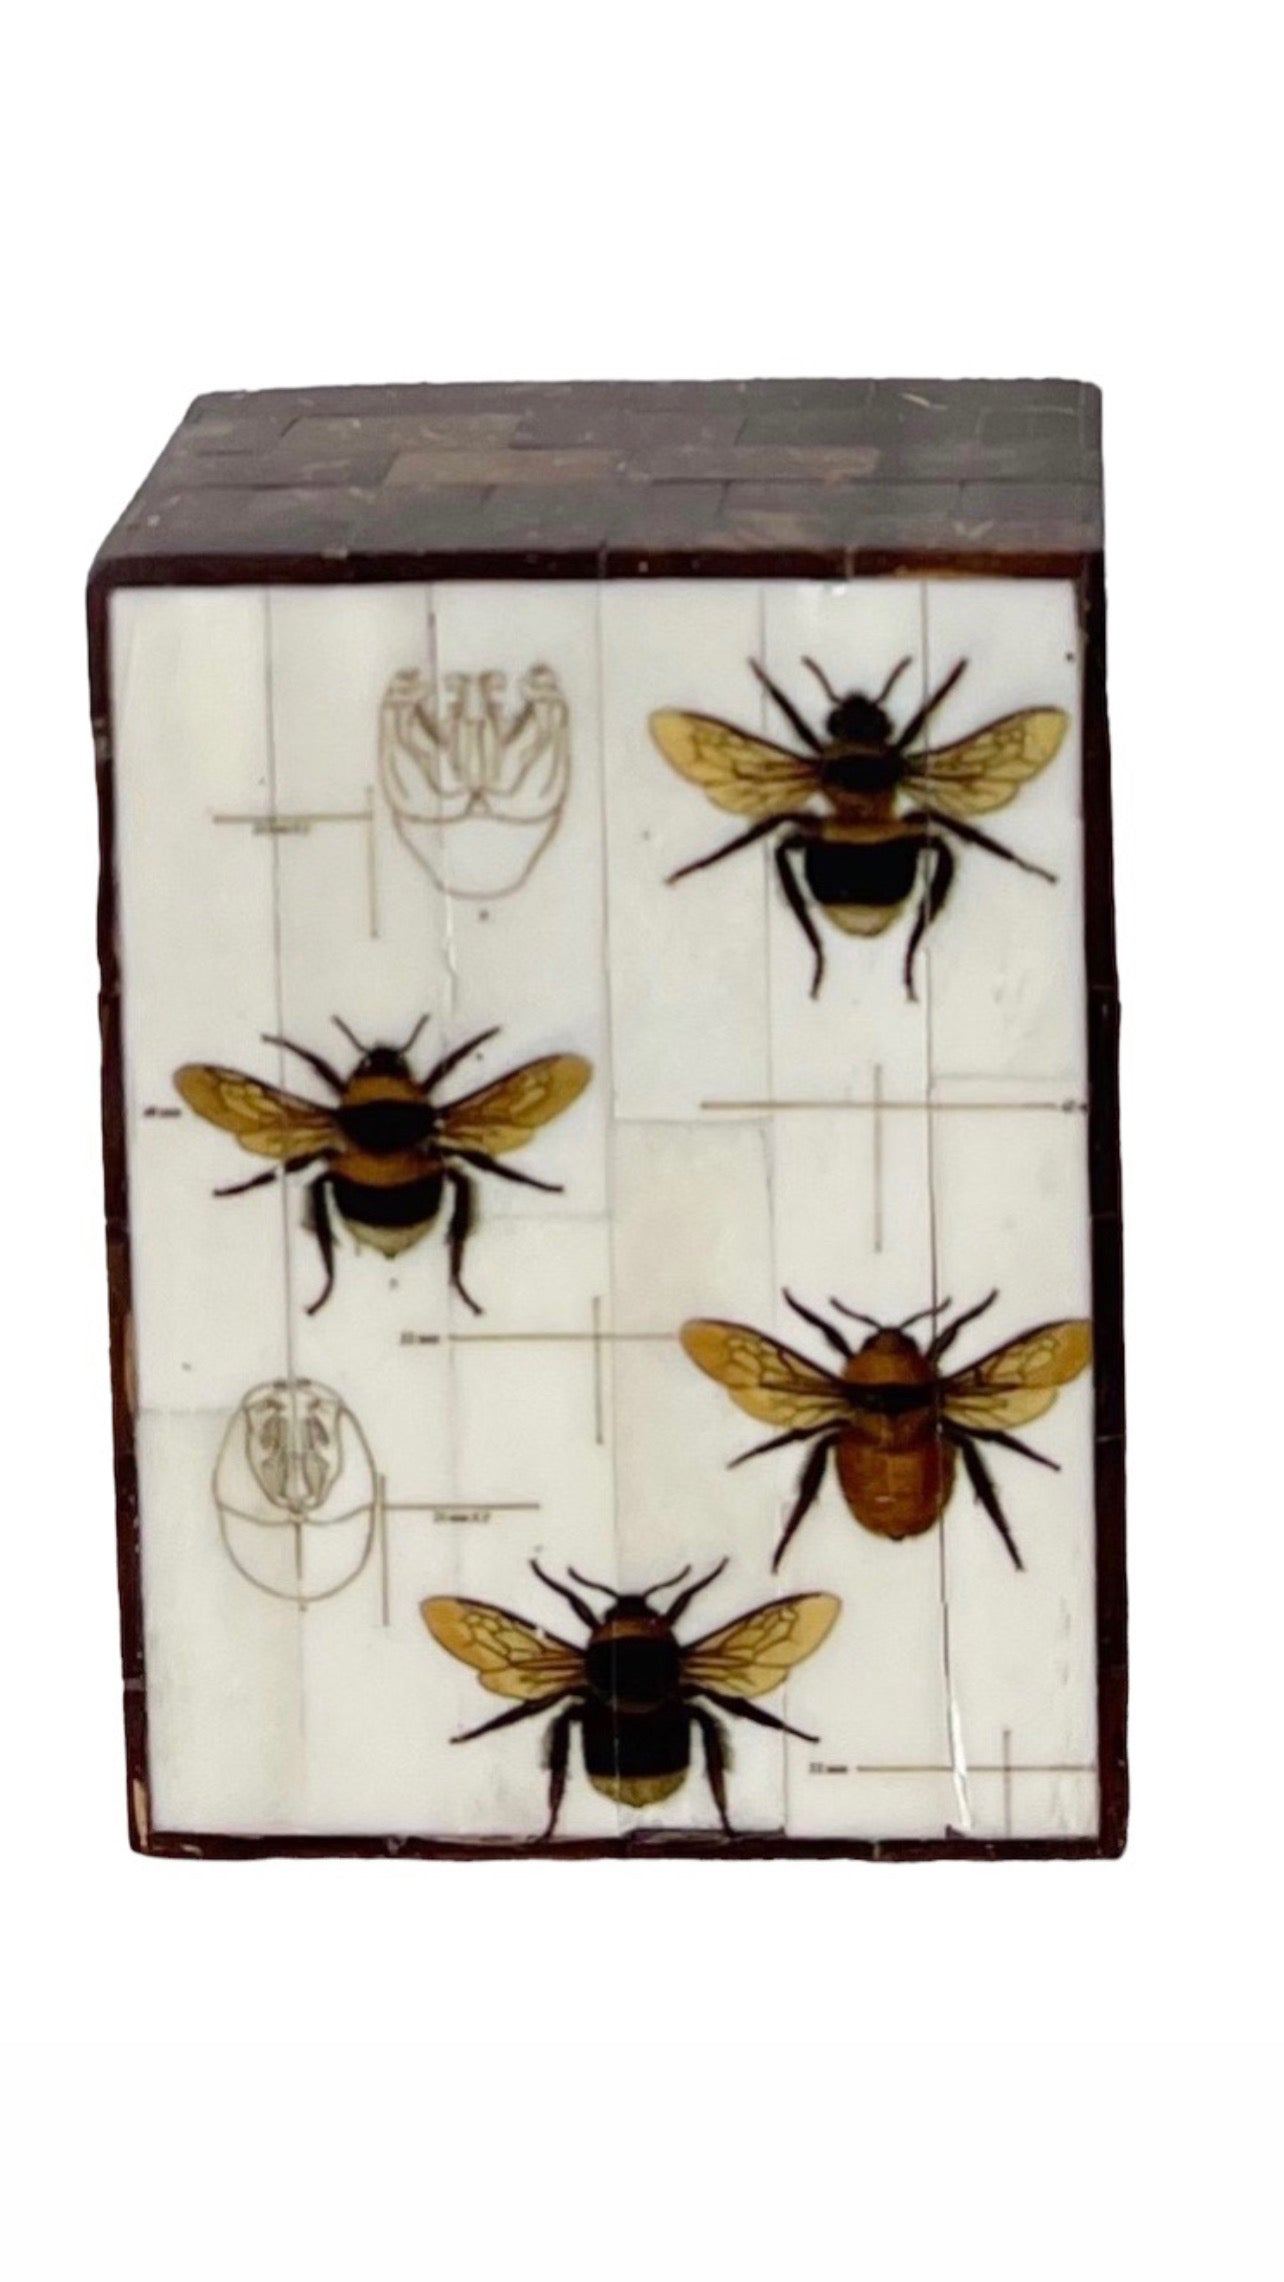 Vintage Coconut Shell Box with Hand-painted Bees